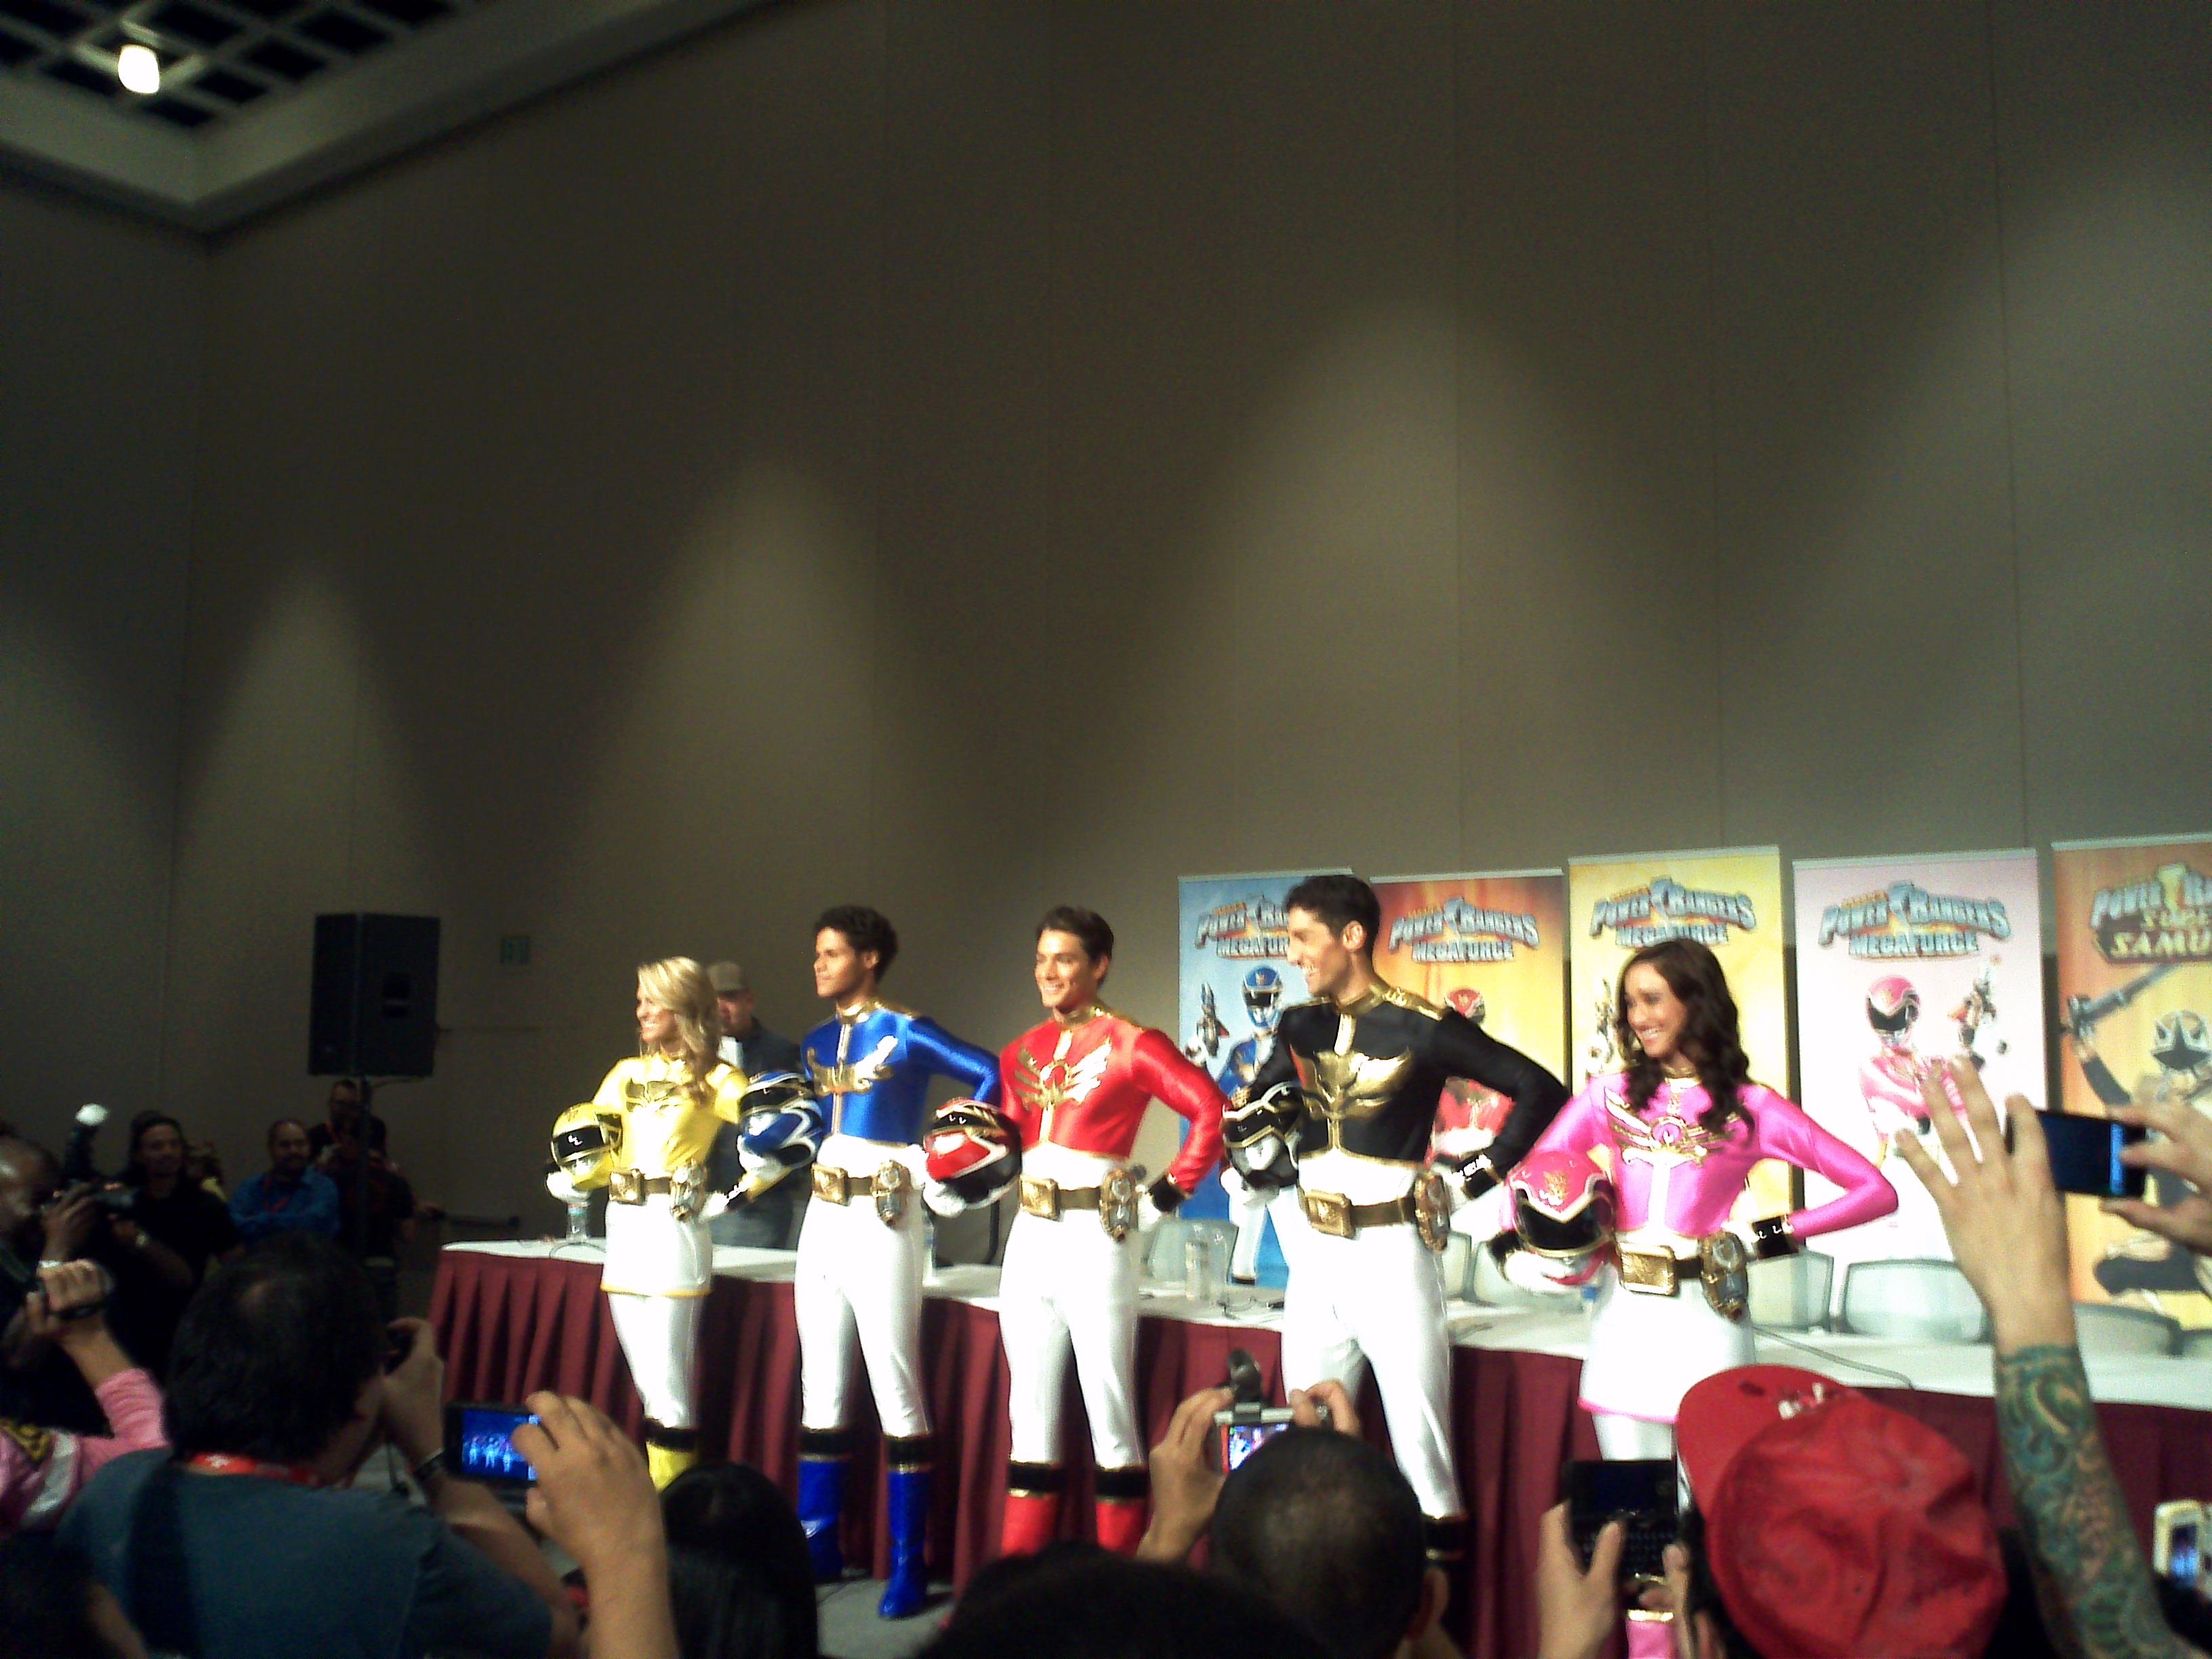 Christina Masterson and rest of cast of 'Power Rangers Megaforce' at Power Morphicon 3